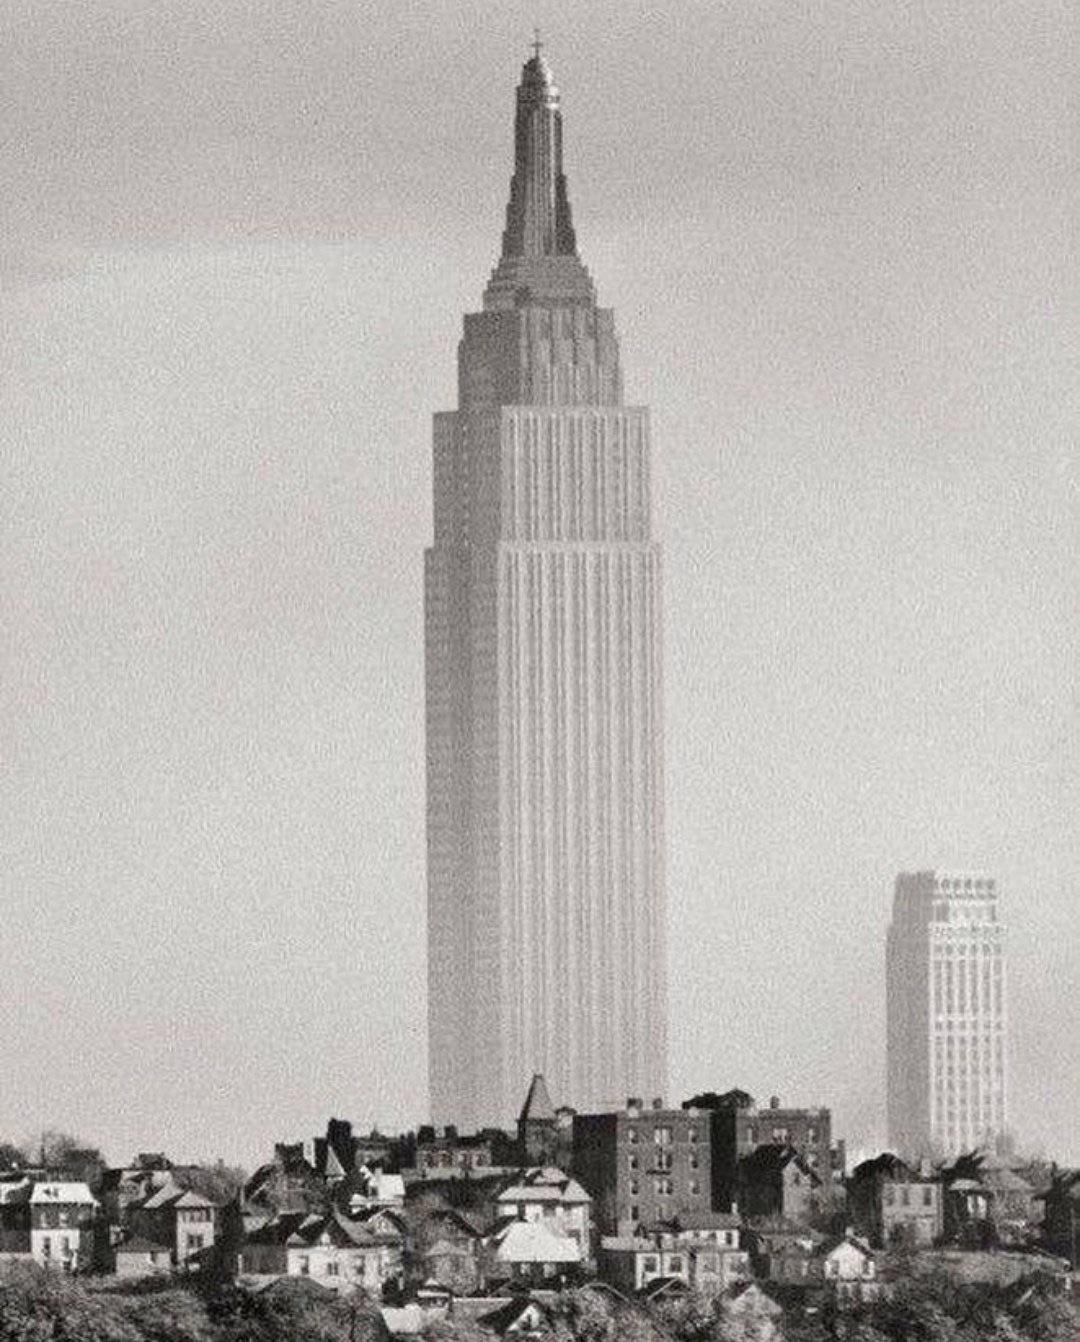 The Empire State Building seen from New Jersey shortly after its completion in the 1930s.jpg